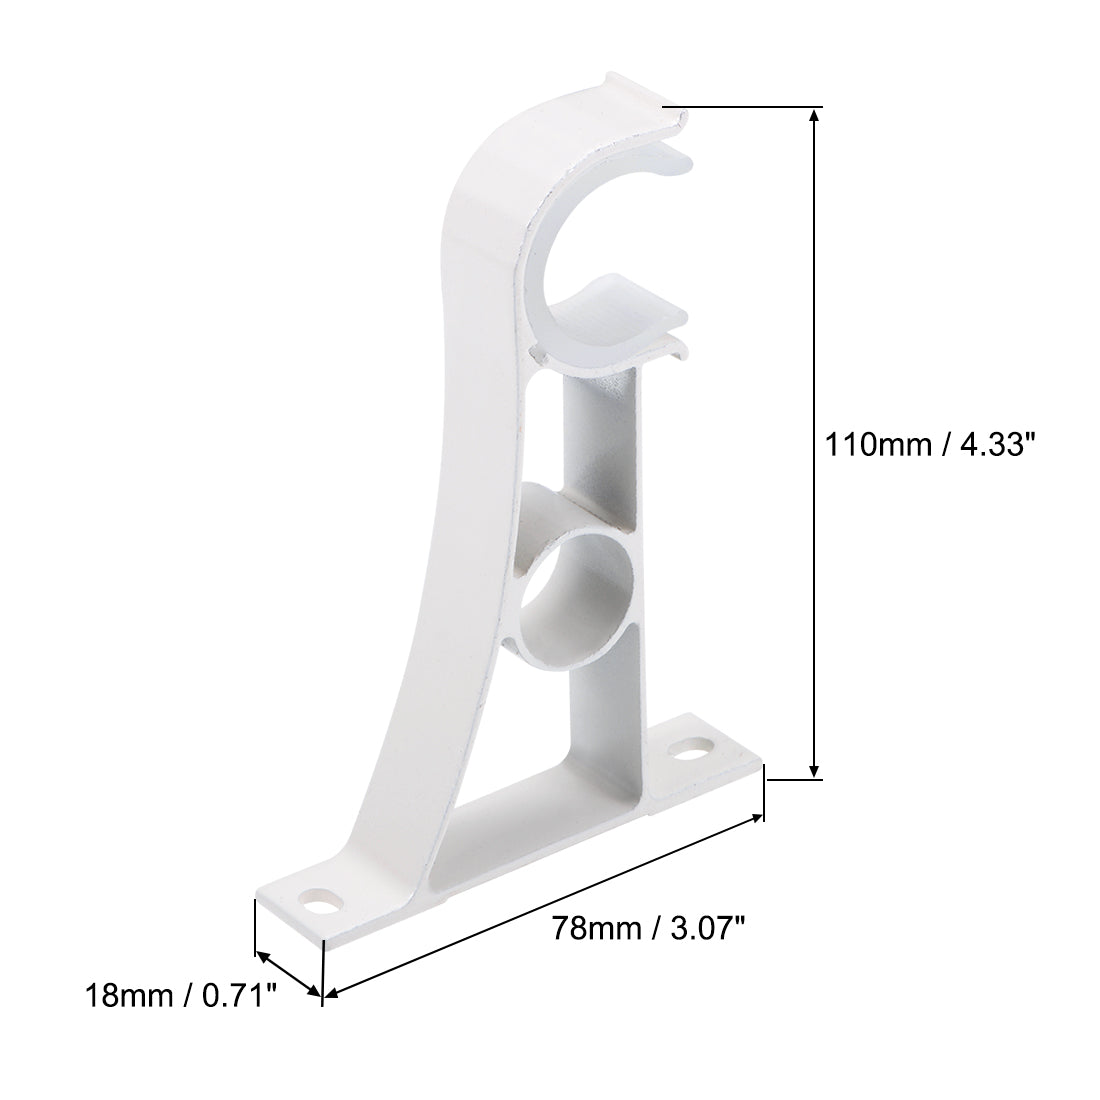 uxcell Uxcell Curtain Rod Bracket Aluminum Alloy Single Holder Support for 25mm Drapery Rod 110 x 78 x 18mm White 4Pcs